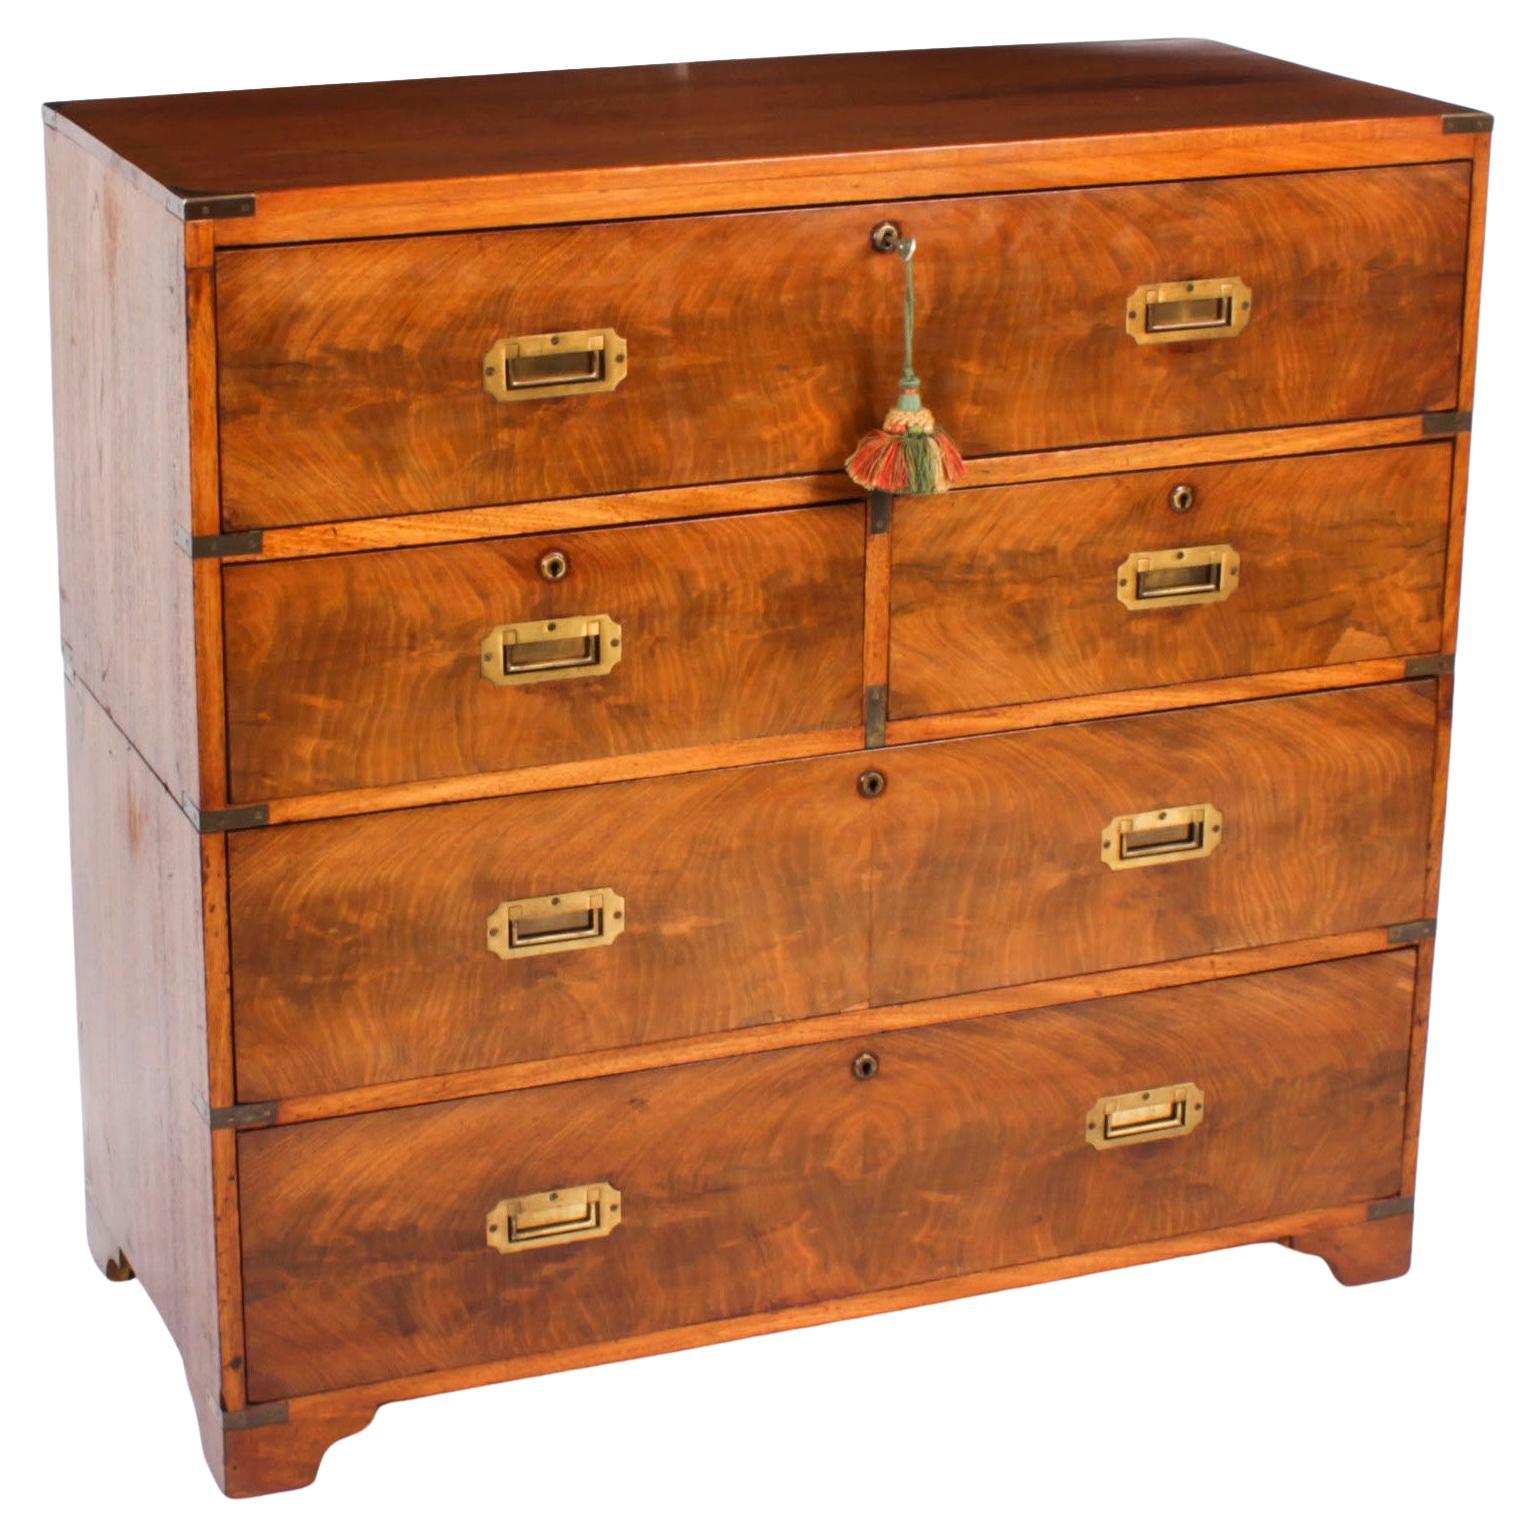 Antique Victorian Campaign Era Military Secretaire Chest of Drawers C1840 For Sale